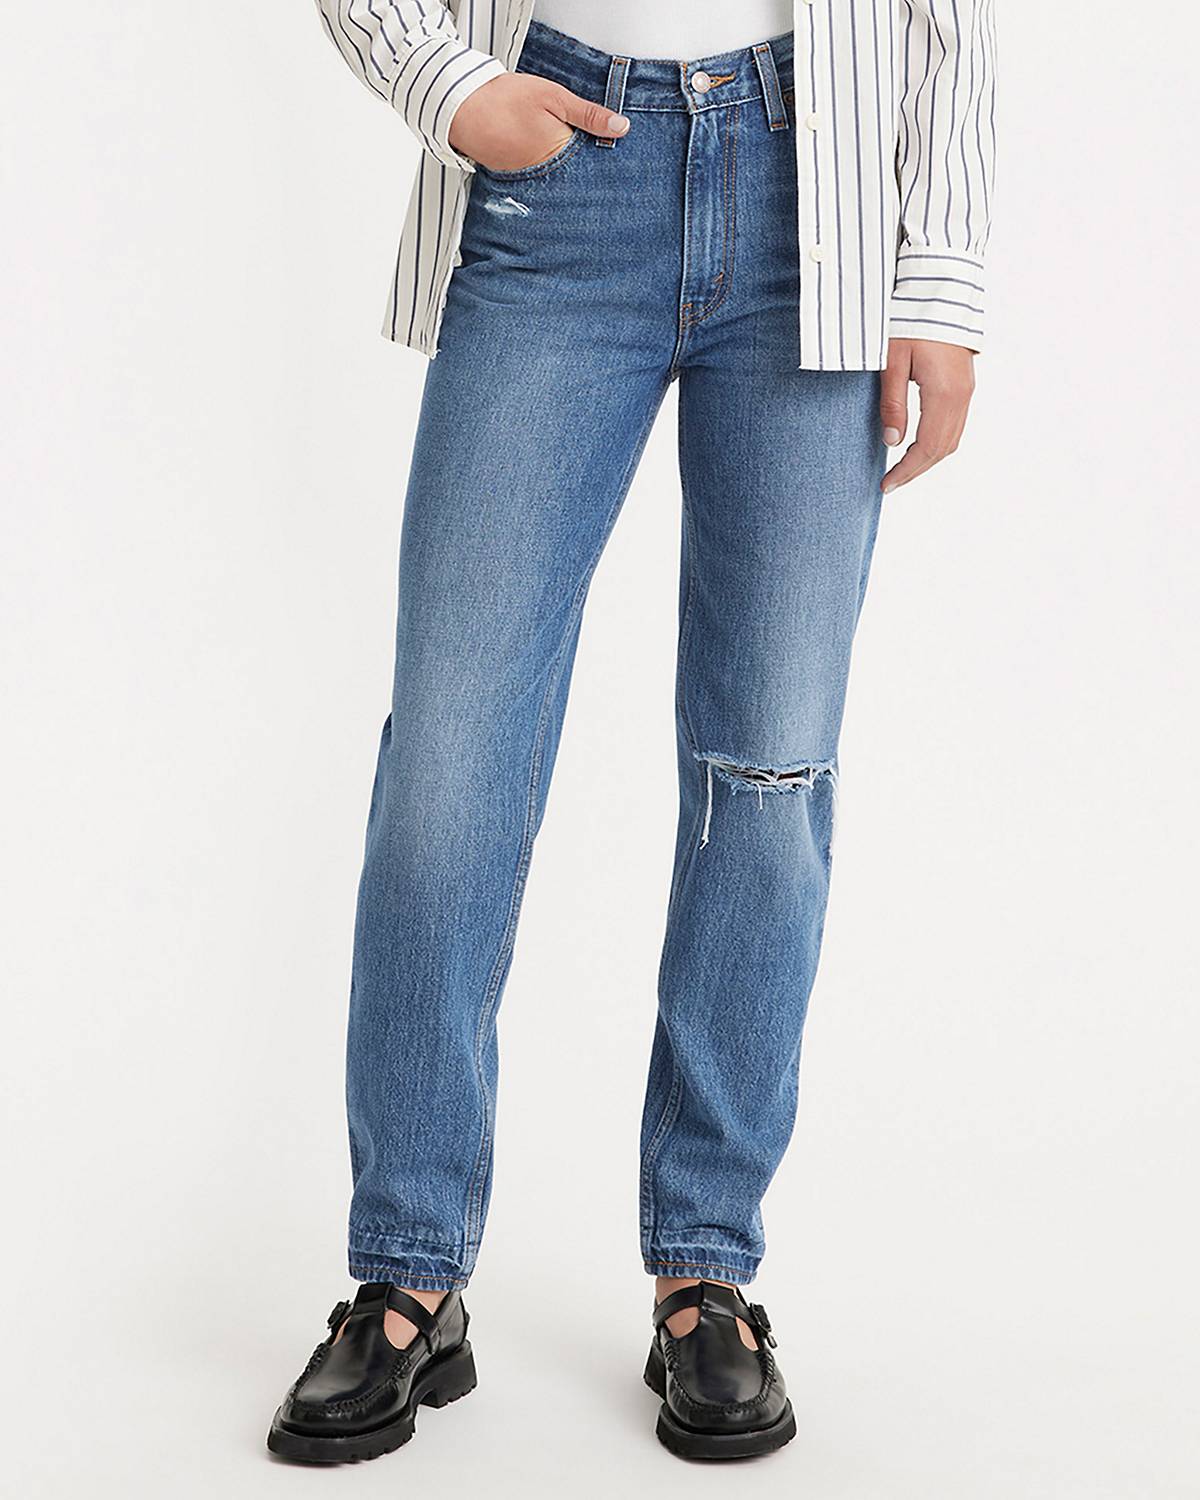 Ripped Jeans - Distressed Jeans - Ripped & Distressed Jeans for Women